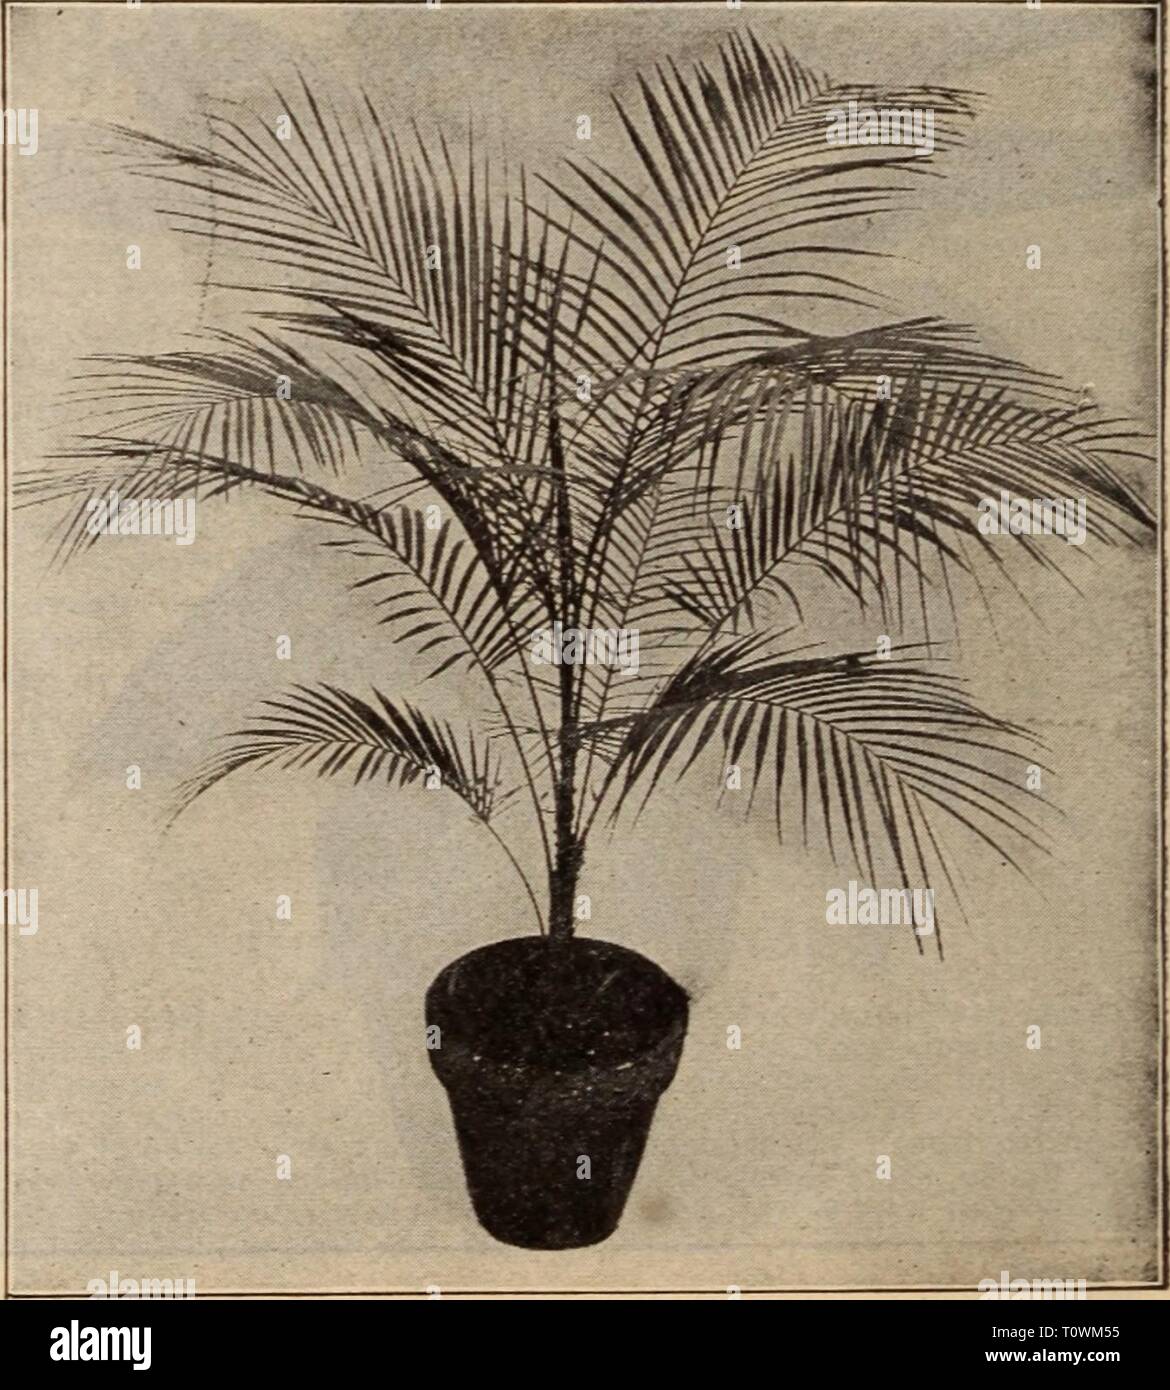 Dreer's wholesale price list  Dreer's wholesale price list / Henry A. Dreer.  dreerswholesalep1912dree Year:   ARECA LUTESCENS Acanthorhiza Aculeata. 6-inch pots, $1.50 each. / Areca Lutescens. A splendid lot of 3-inch pots, 3 plants in a pot, a size that is very popular and sells freely. $1.25 per doz.; $10.00 per 100. Areca Verschaffelti. 2*4-inch pots, $1.50 per doz. 3 ' 2.00 4 ' 3.50 $10.00 per 100. 15.00 25.00 Arenga Saccharifera. 3-inch pots, 25 cts. each; $2.50 per do?. Caryota Sobolifera. 3-inch pots, 15 inches high. $1.50 per doz.; $10.00 per 100. Caryota Urens. 3-inch pots, $1.50 per Stock Photo